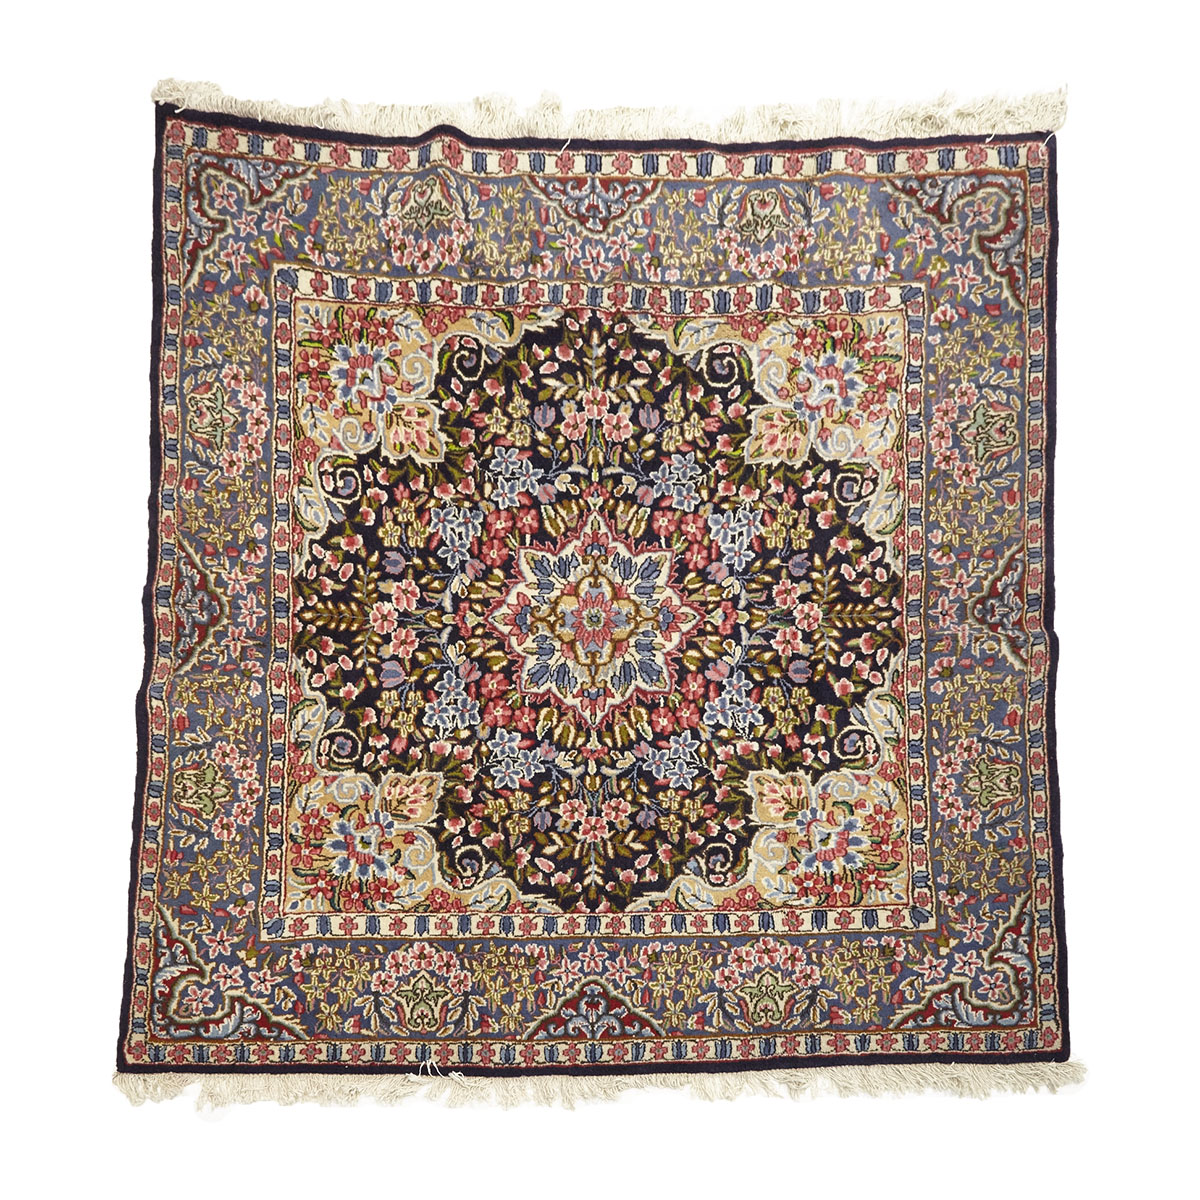 Laver Kerman Rug, mid to late 20th century